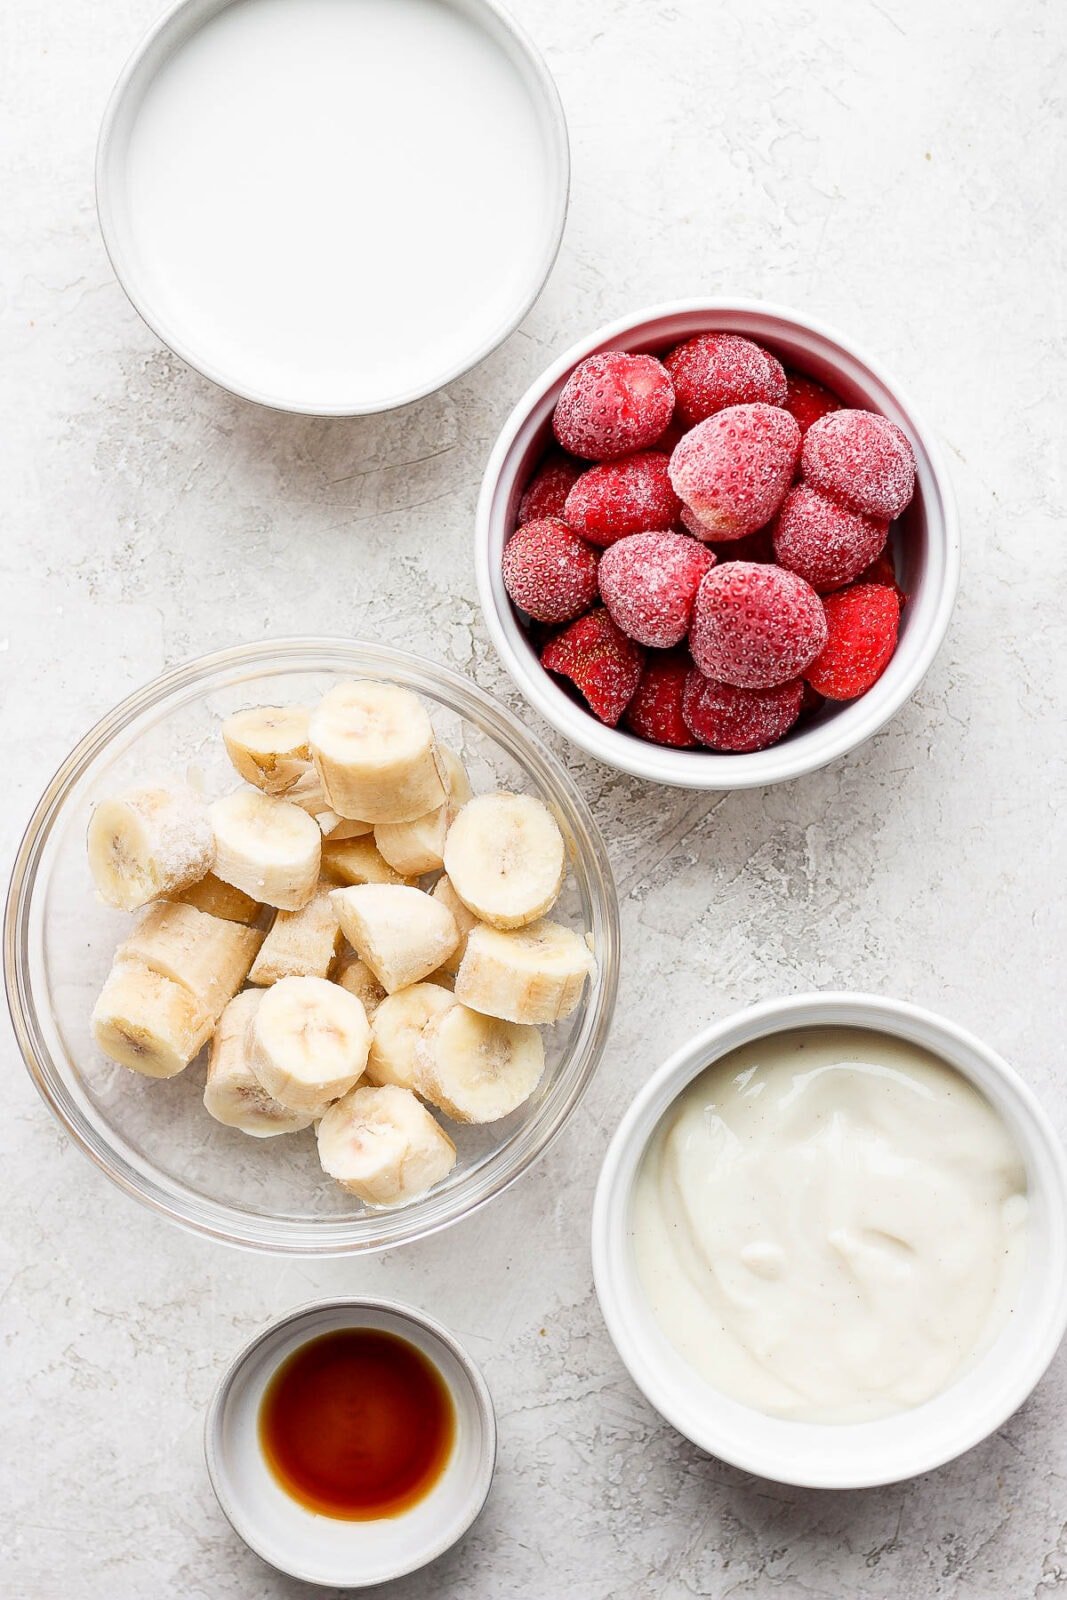 Strawberry banana smoothie ingredients in small bowls.